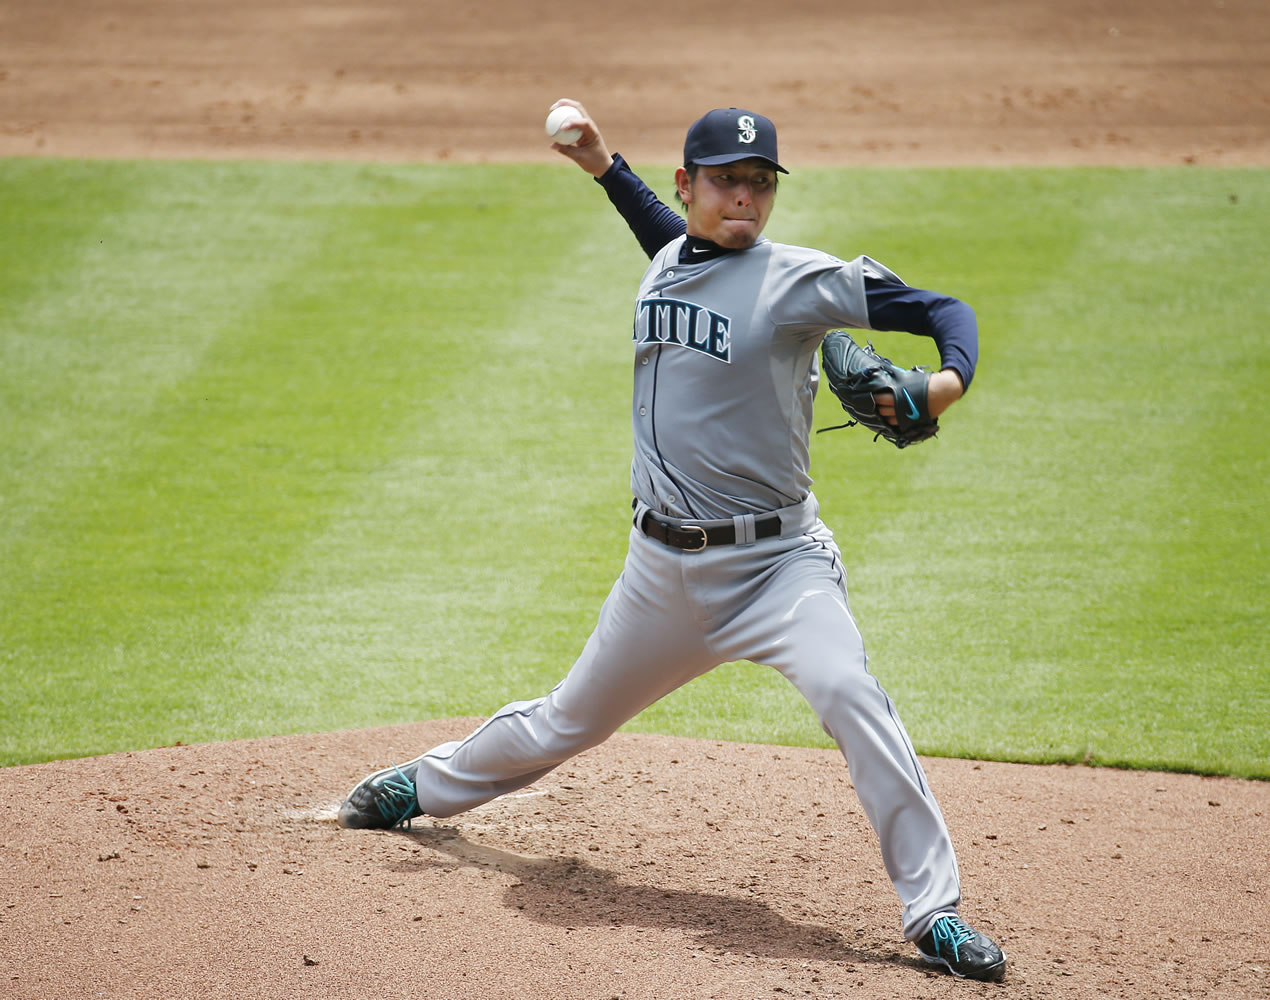 Seattle Mariners starting pitcher Hisashi Iwakuma (18) works in the first inning of a baseball game against the Atlanta Braves on. Wednesday.